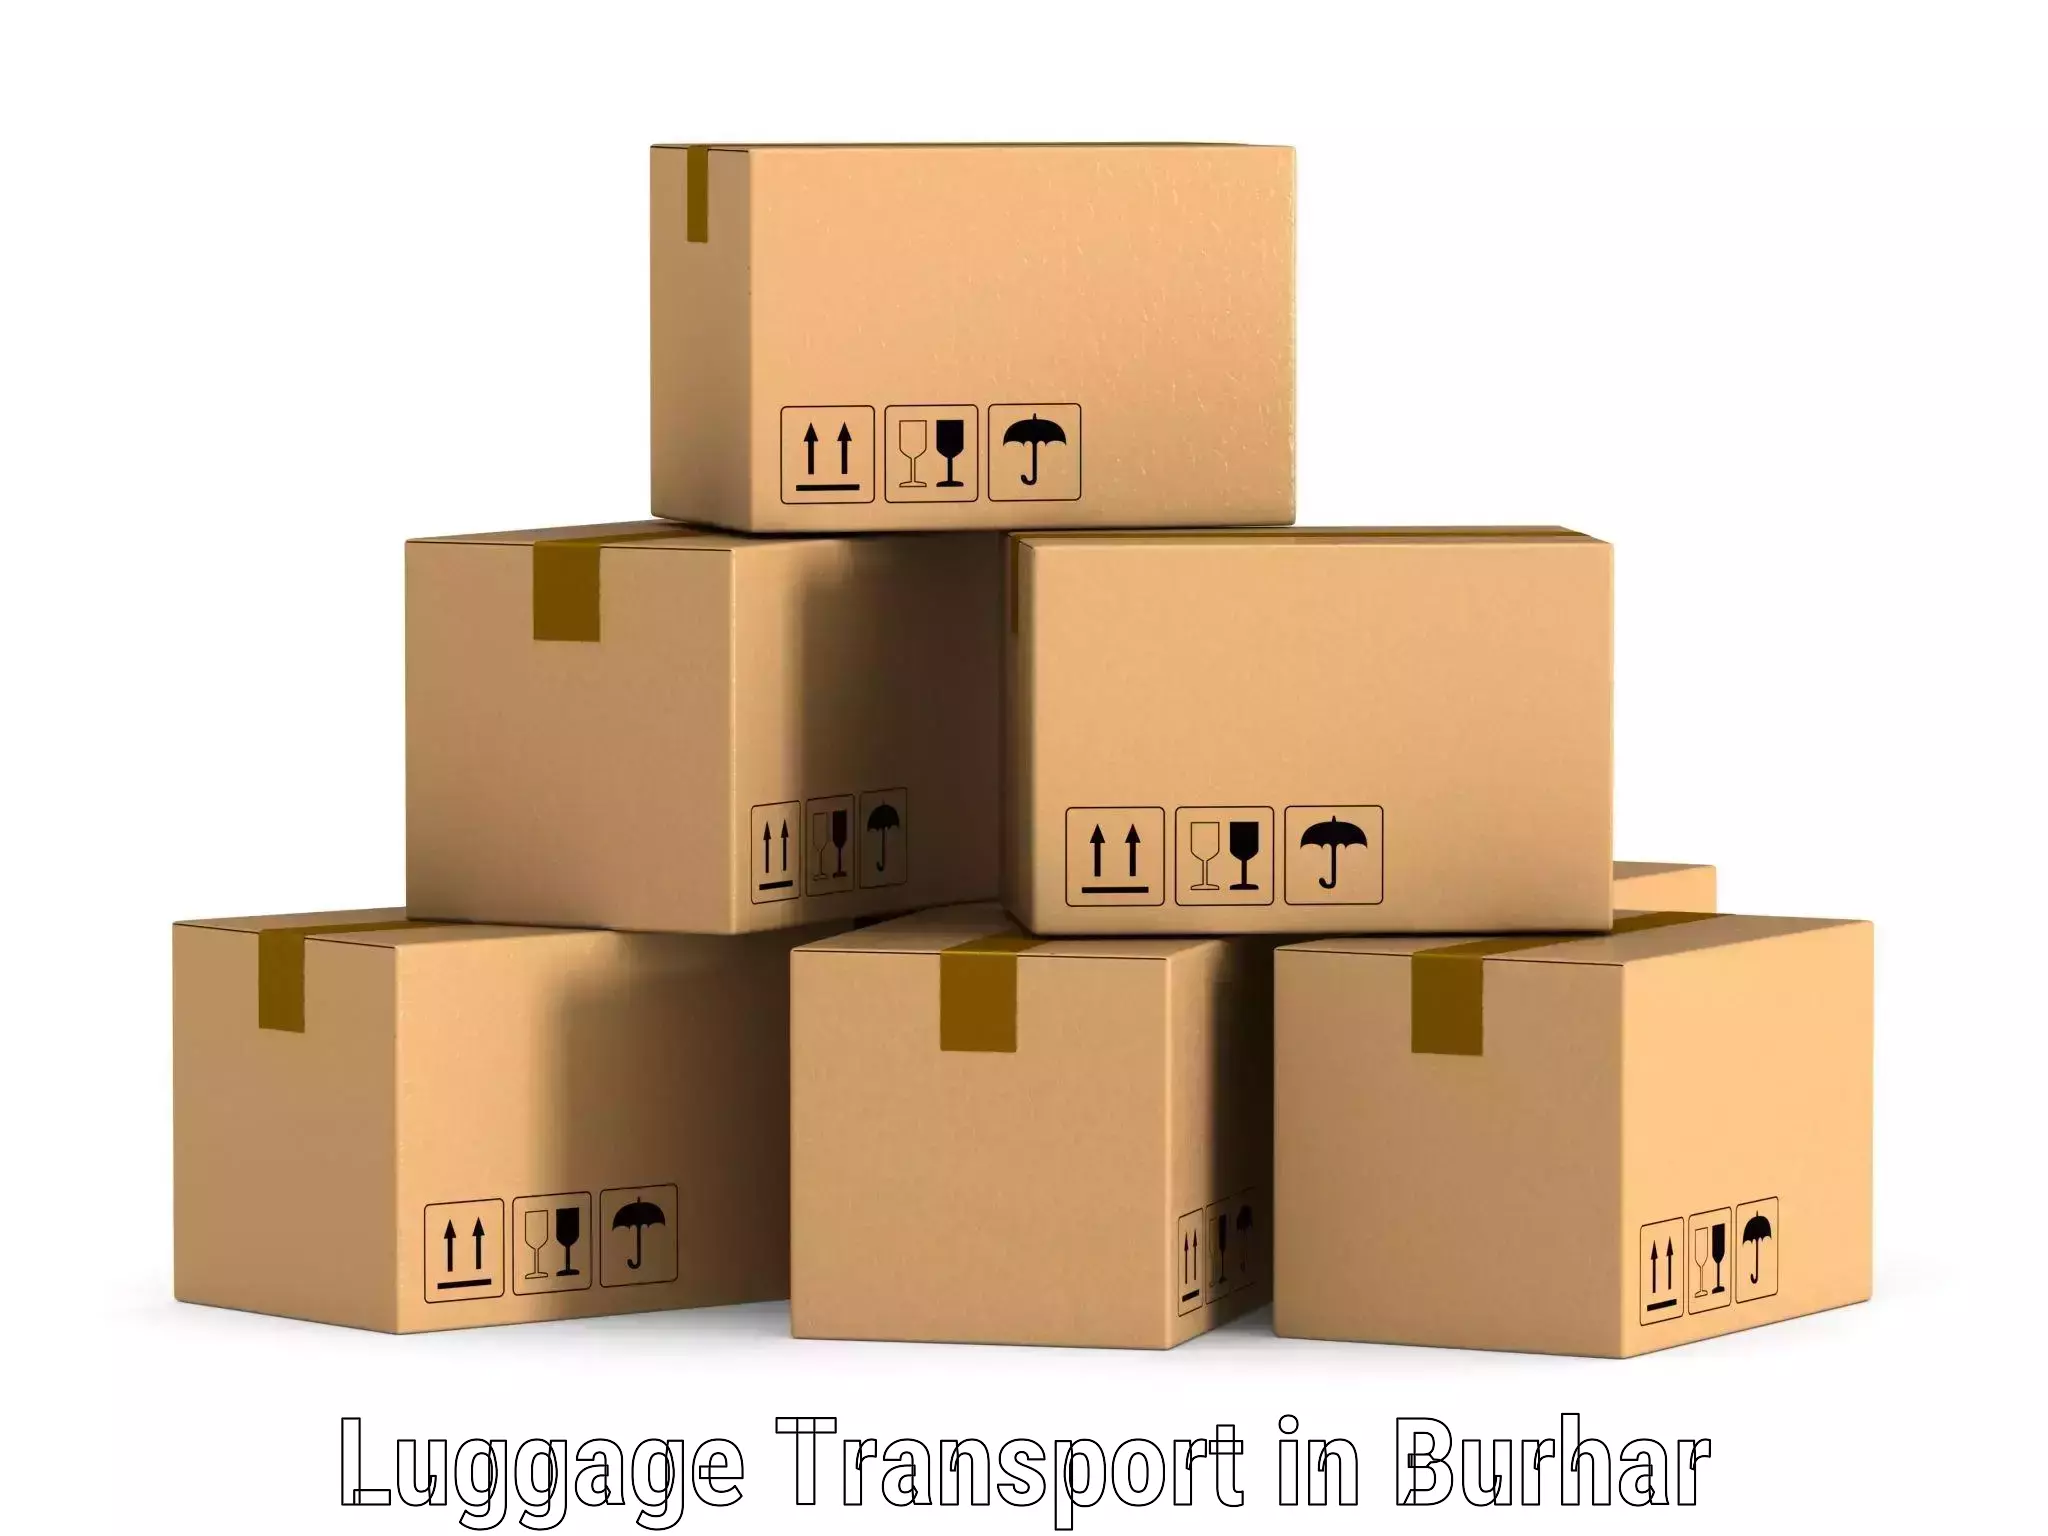 Luggage transport solutions in Burhar